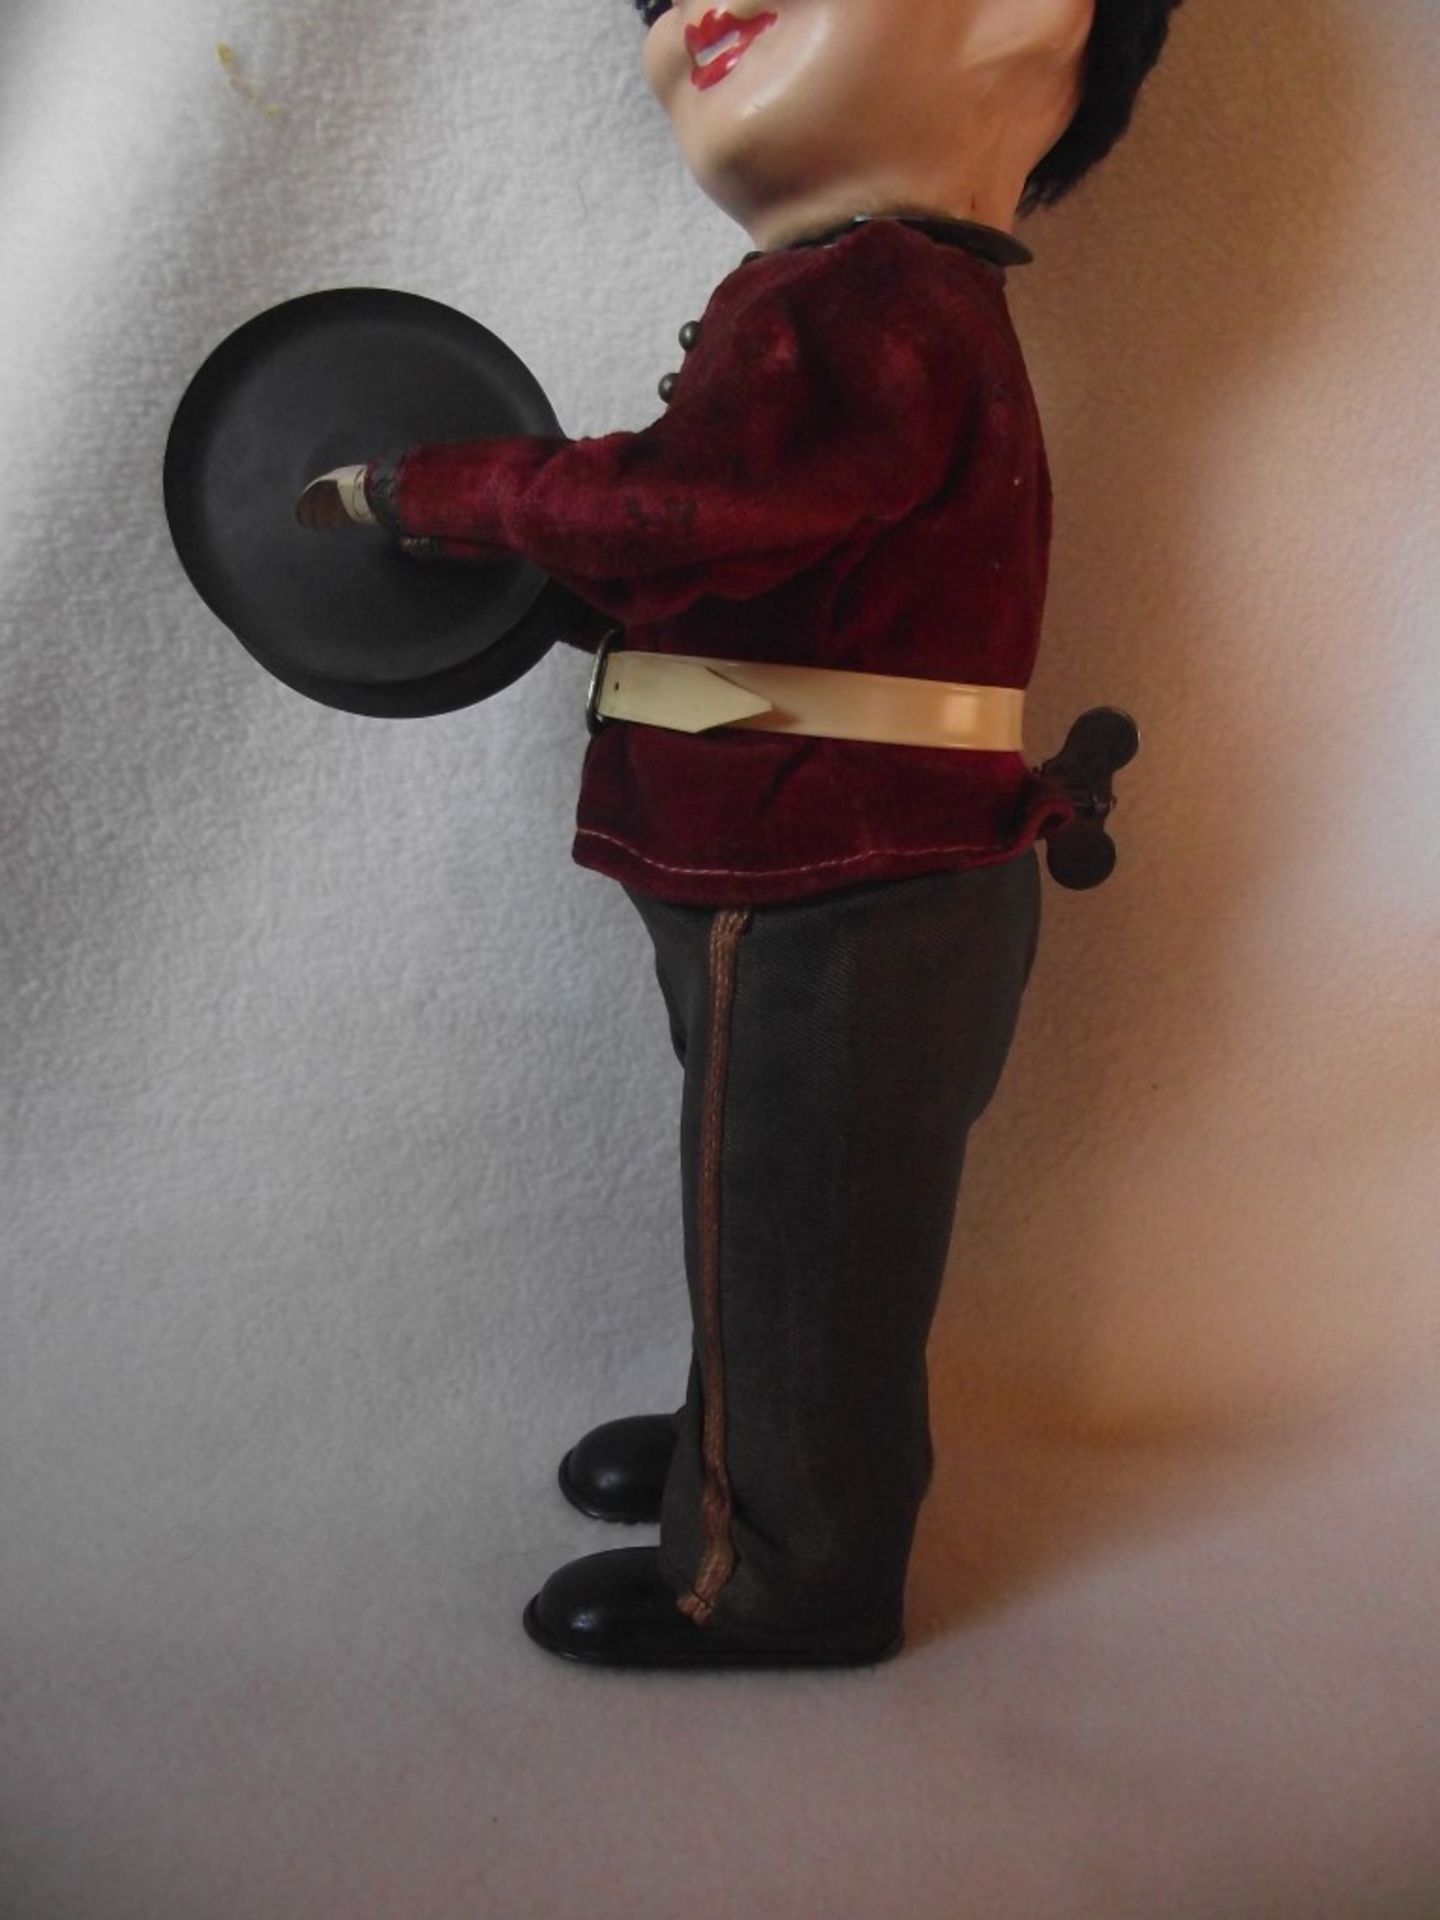 Vintage Clockwork Guardsman Playing Cymbals - Moving Bisque Head -1950's-1960's - Image 5 of 23